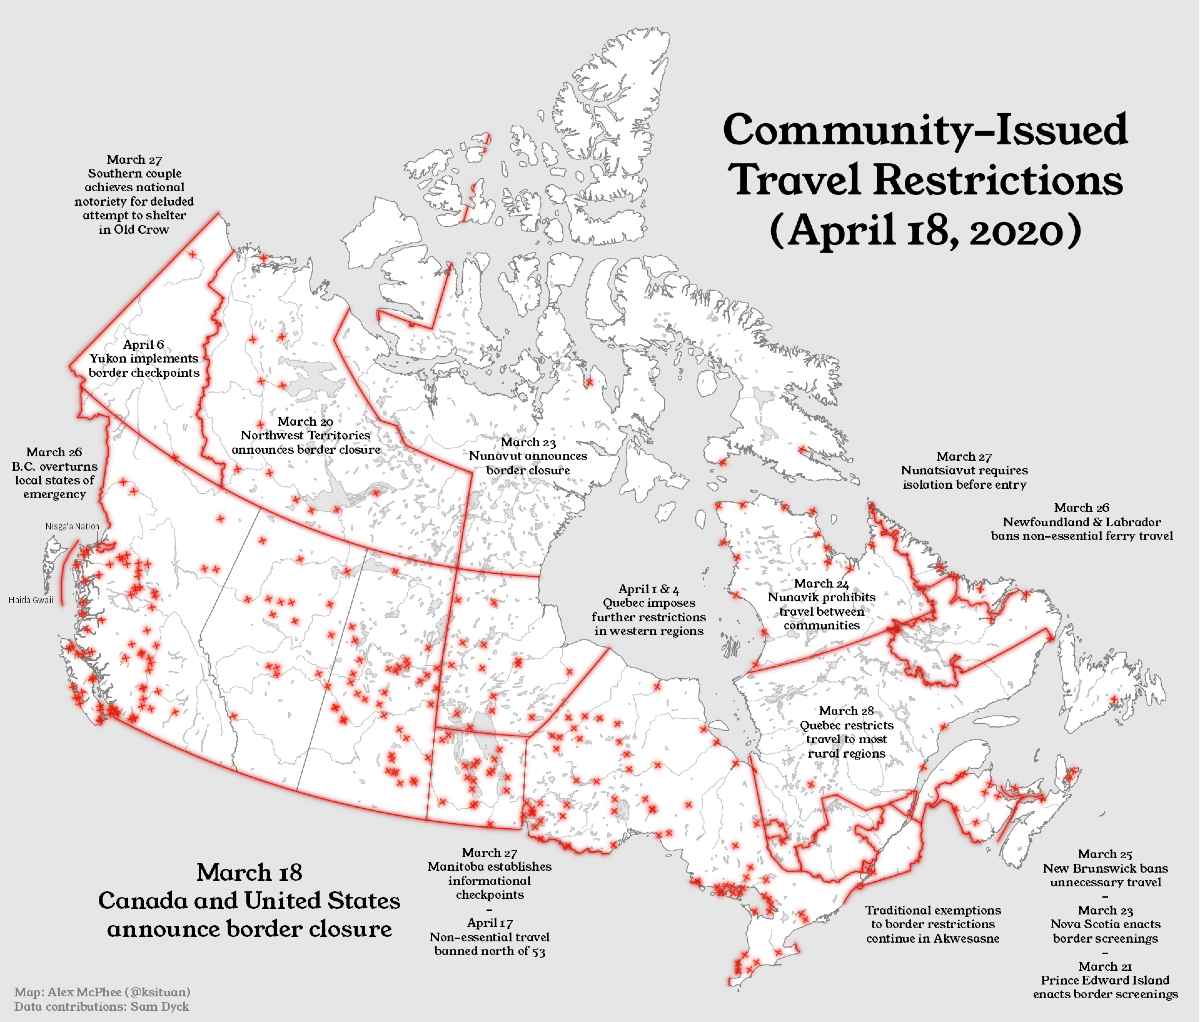 Student-generated map visualizes travel restrictions of COVID-19 in Northern Canada.